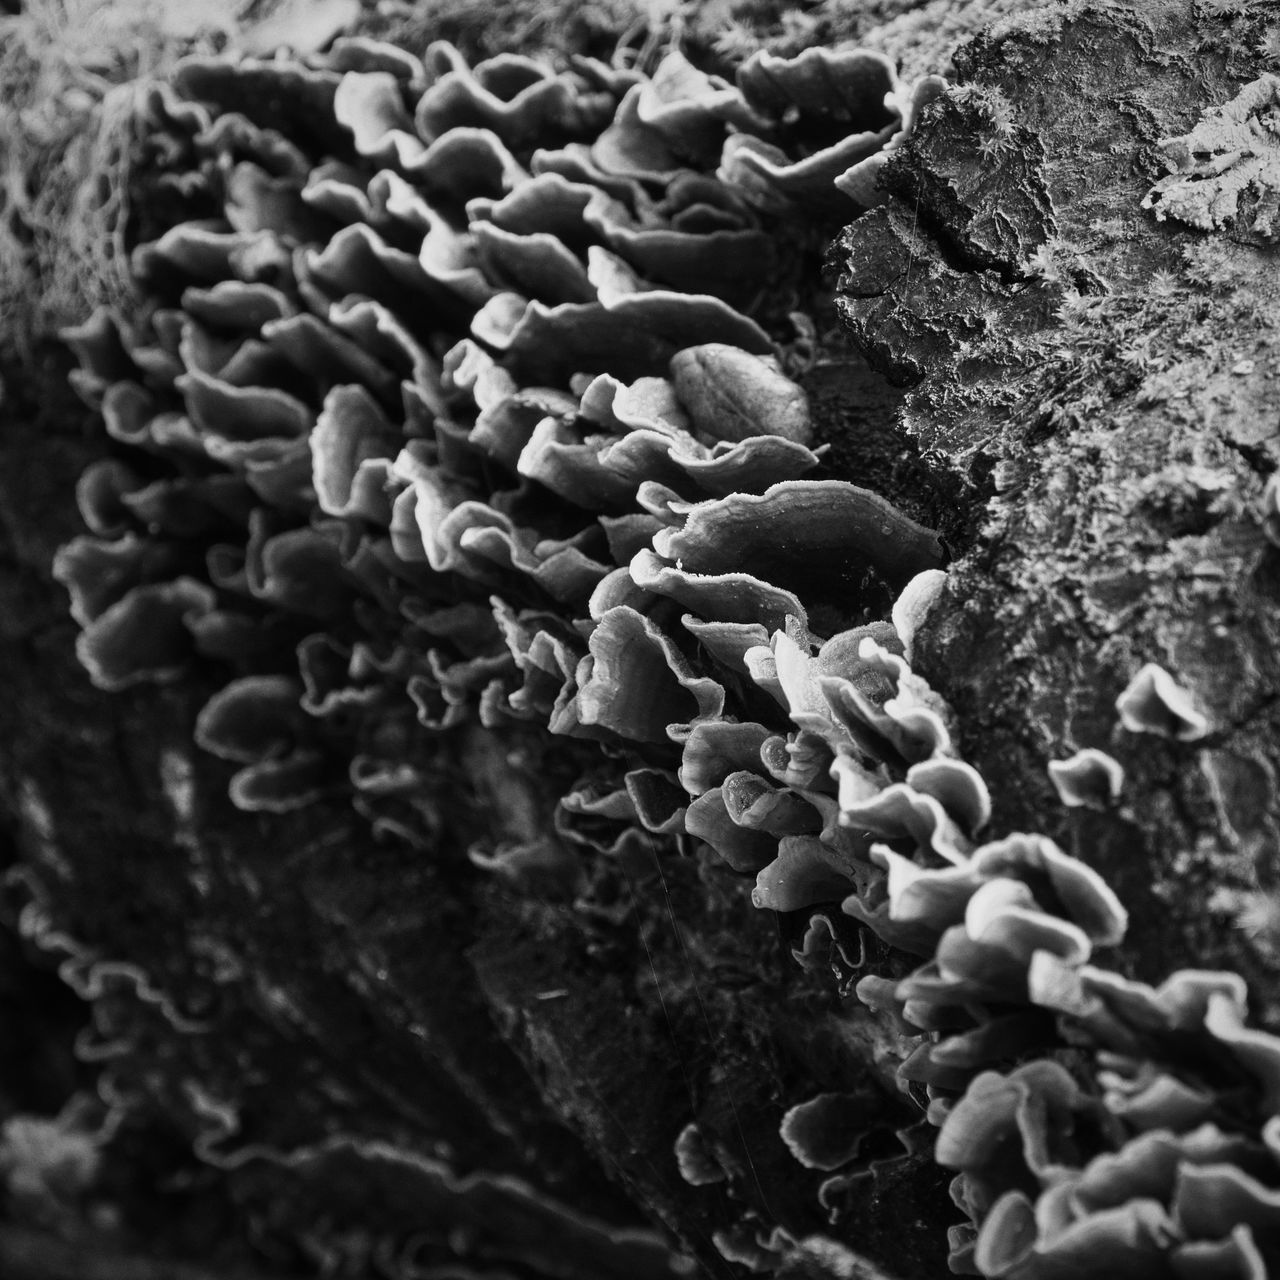 HIGH ANGLE VIEW OF MUSHROOMS ON TREE TRUNK